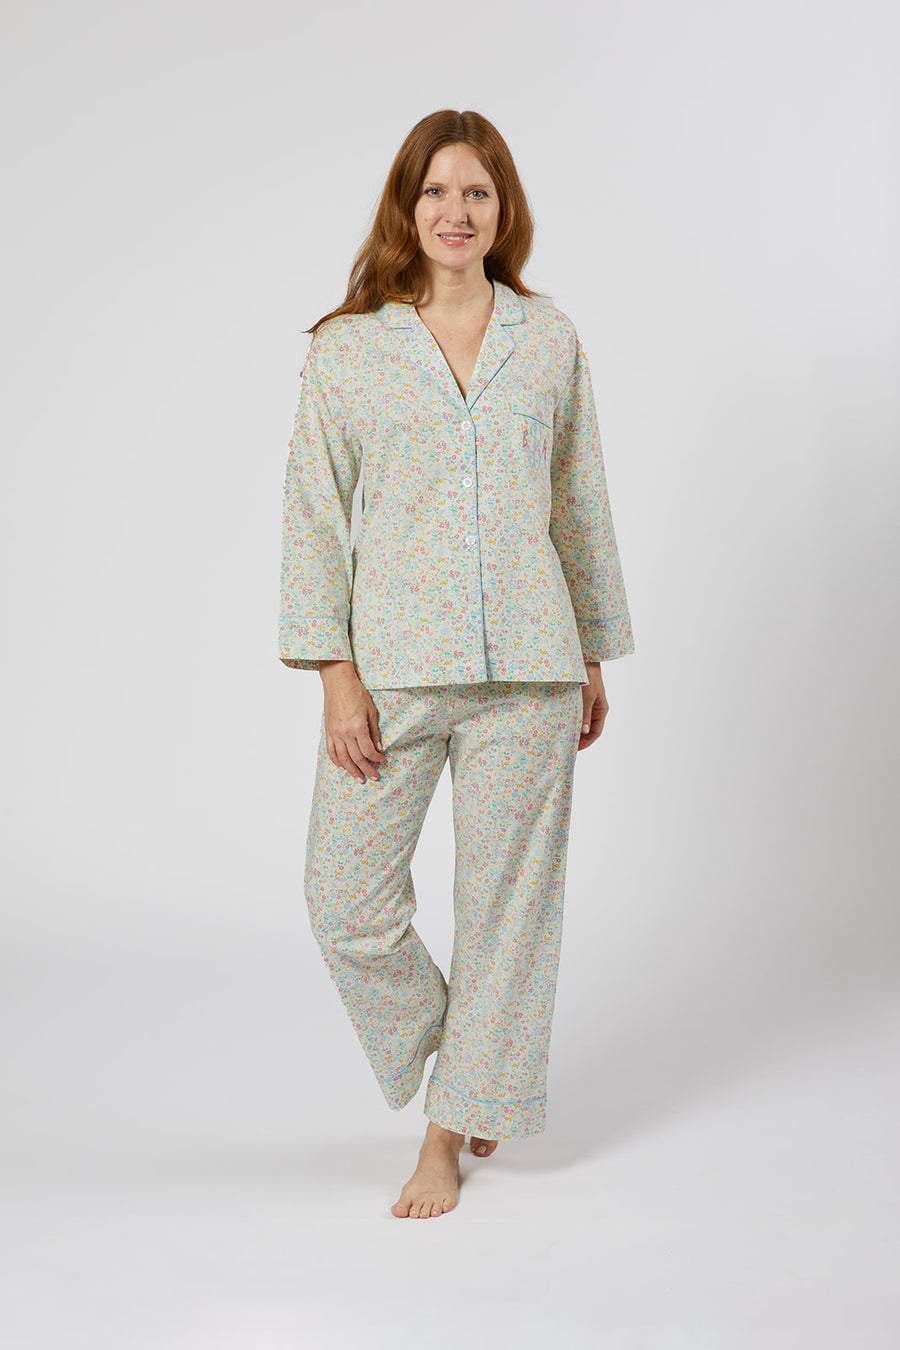 CLASSIC COTTON PAJAMAS IN GARDEN PARTY FLORAL